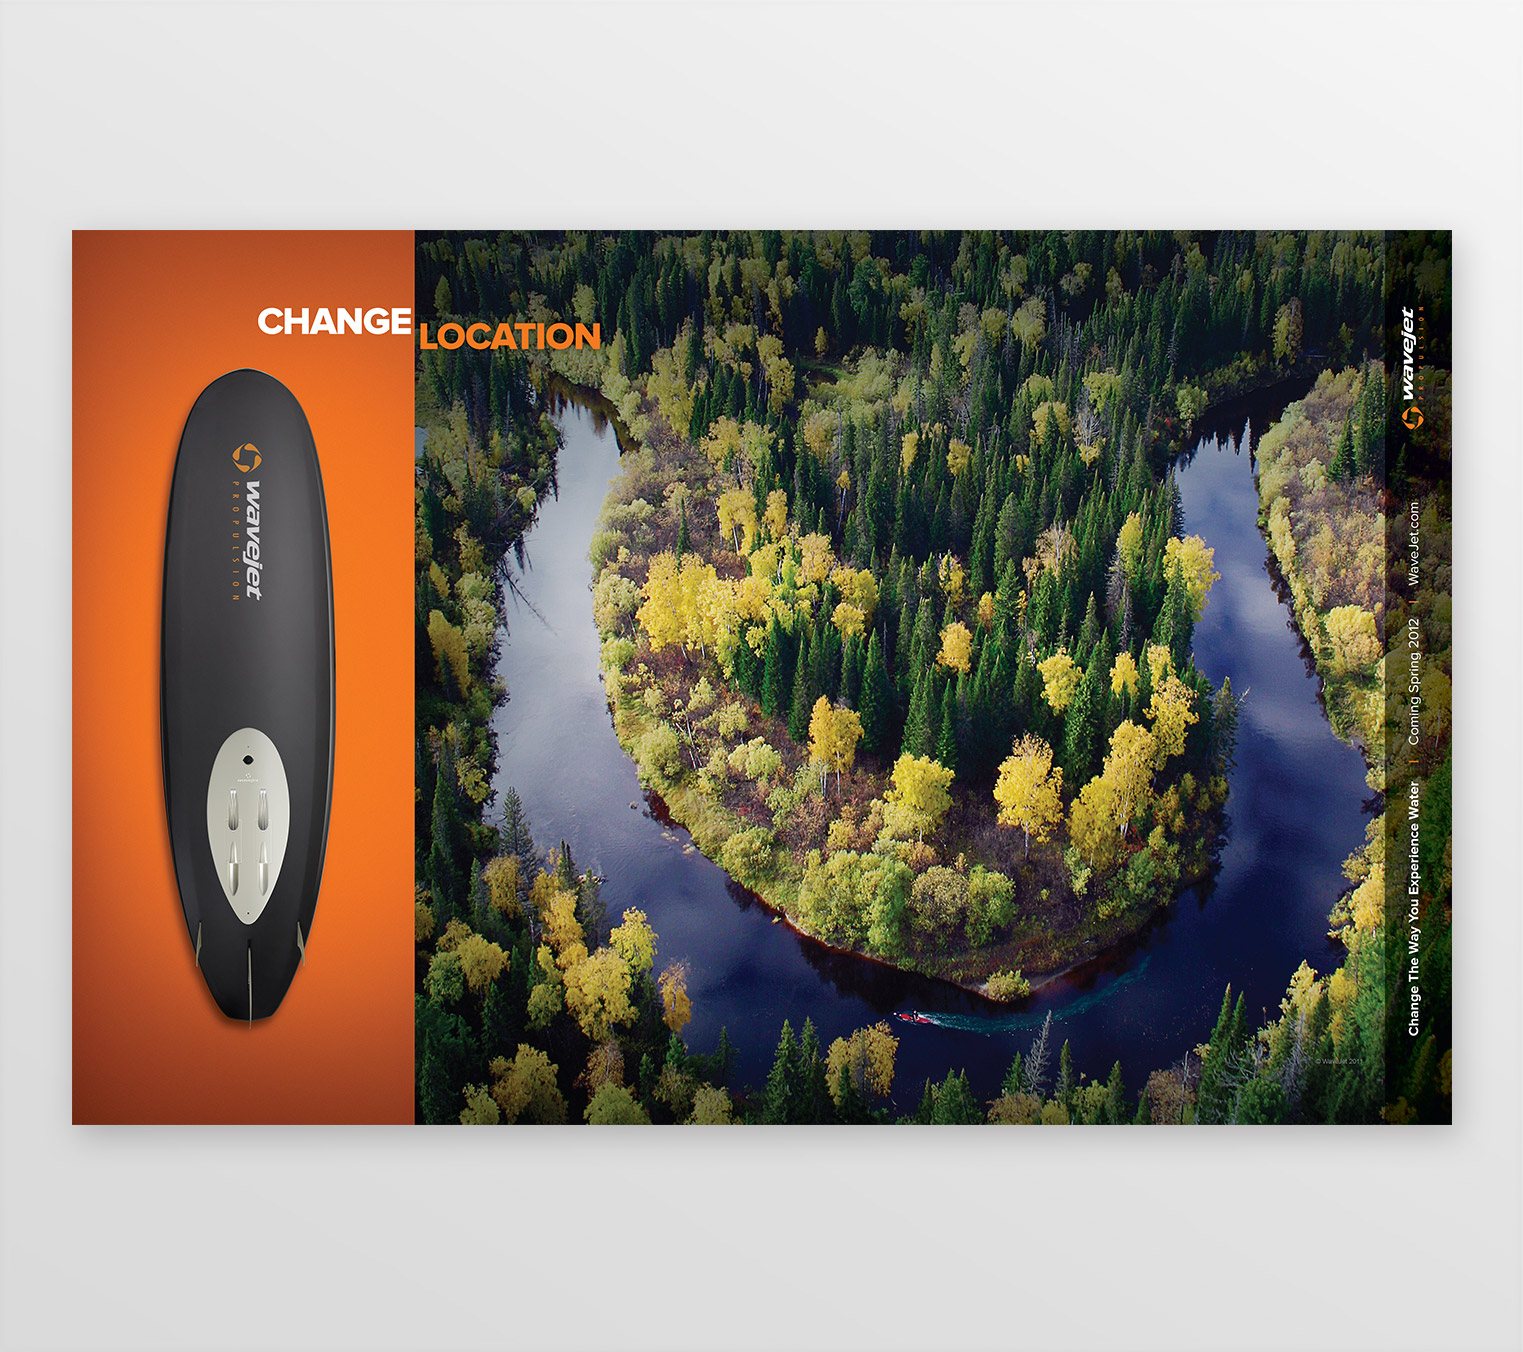 Wavejet print advertising - Jet powered surfboard on orange background next to photo of backcountry winding stream with headline: Change Location